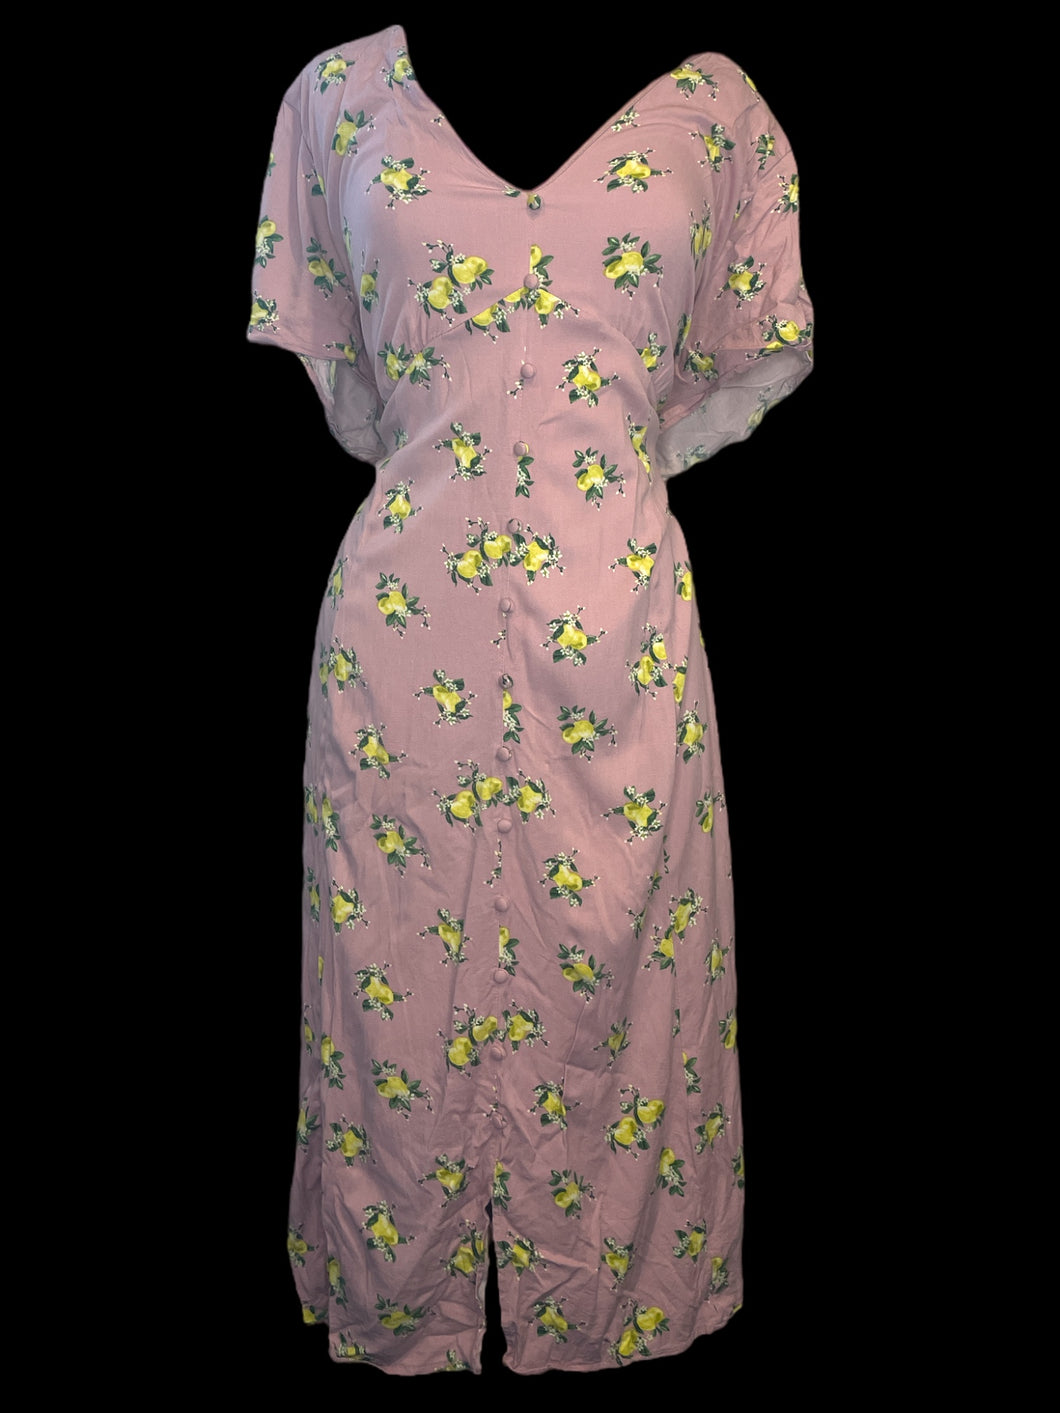 3X Dusty rose & yellow, green, & white lemon pattern short sleeve v-neck dress w/ faux button front, dusty rose lining & petticoat, & button keyhole closure